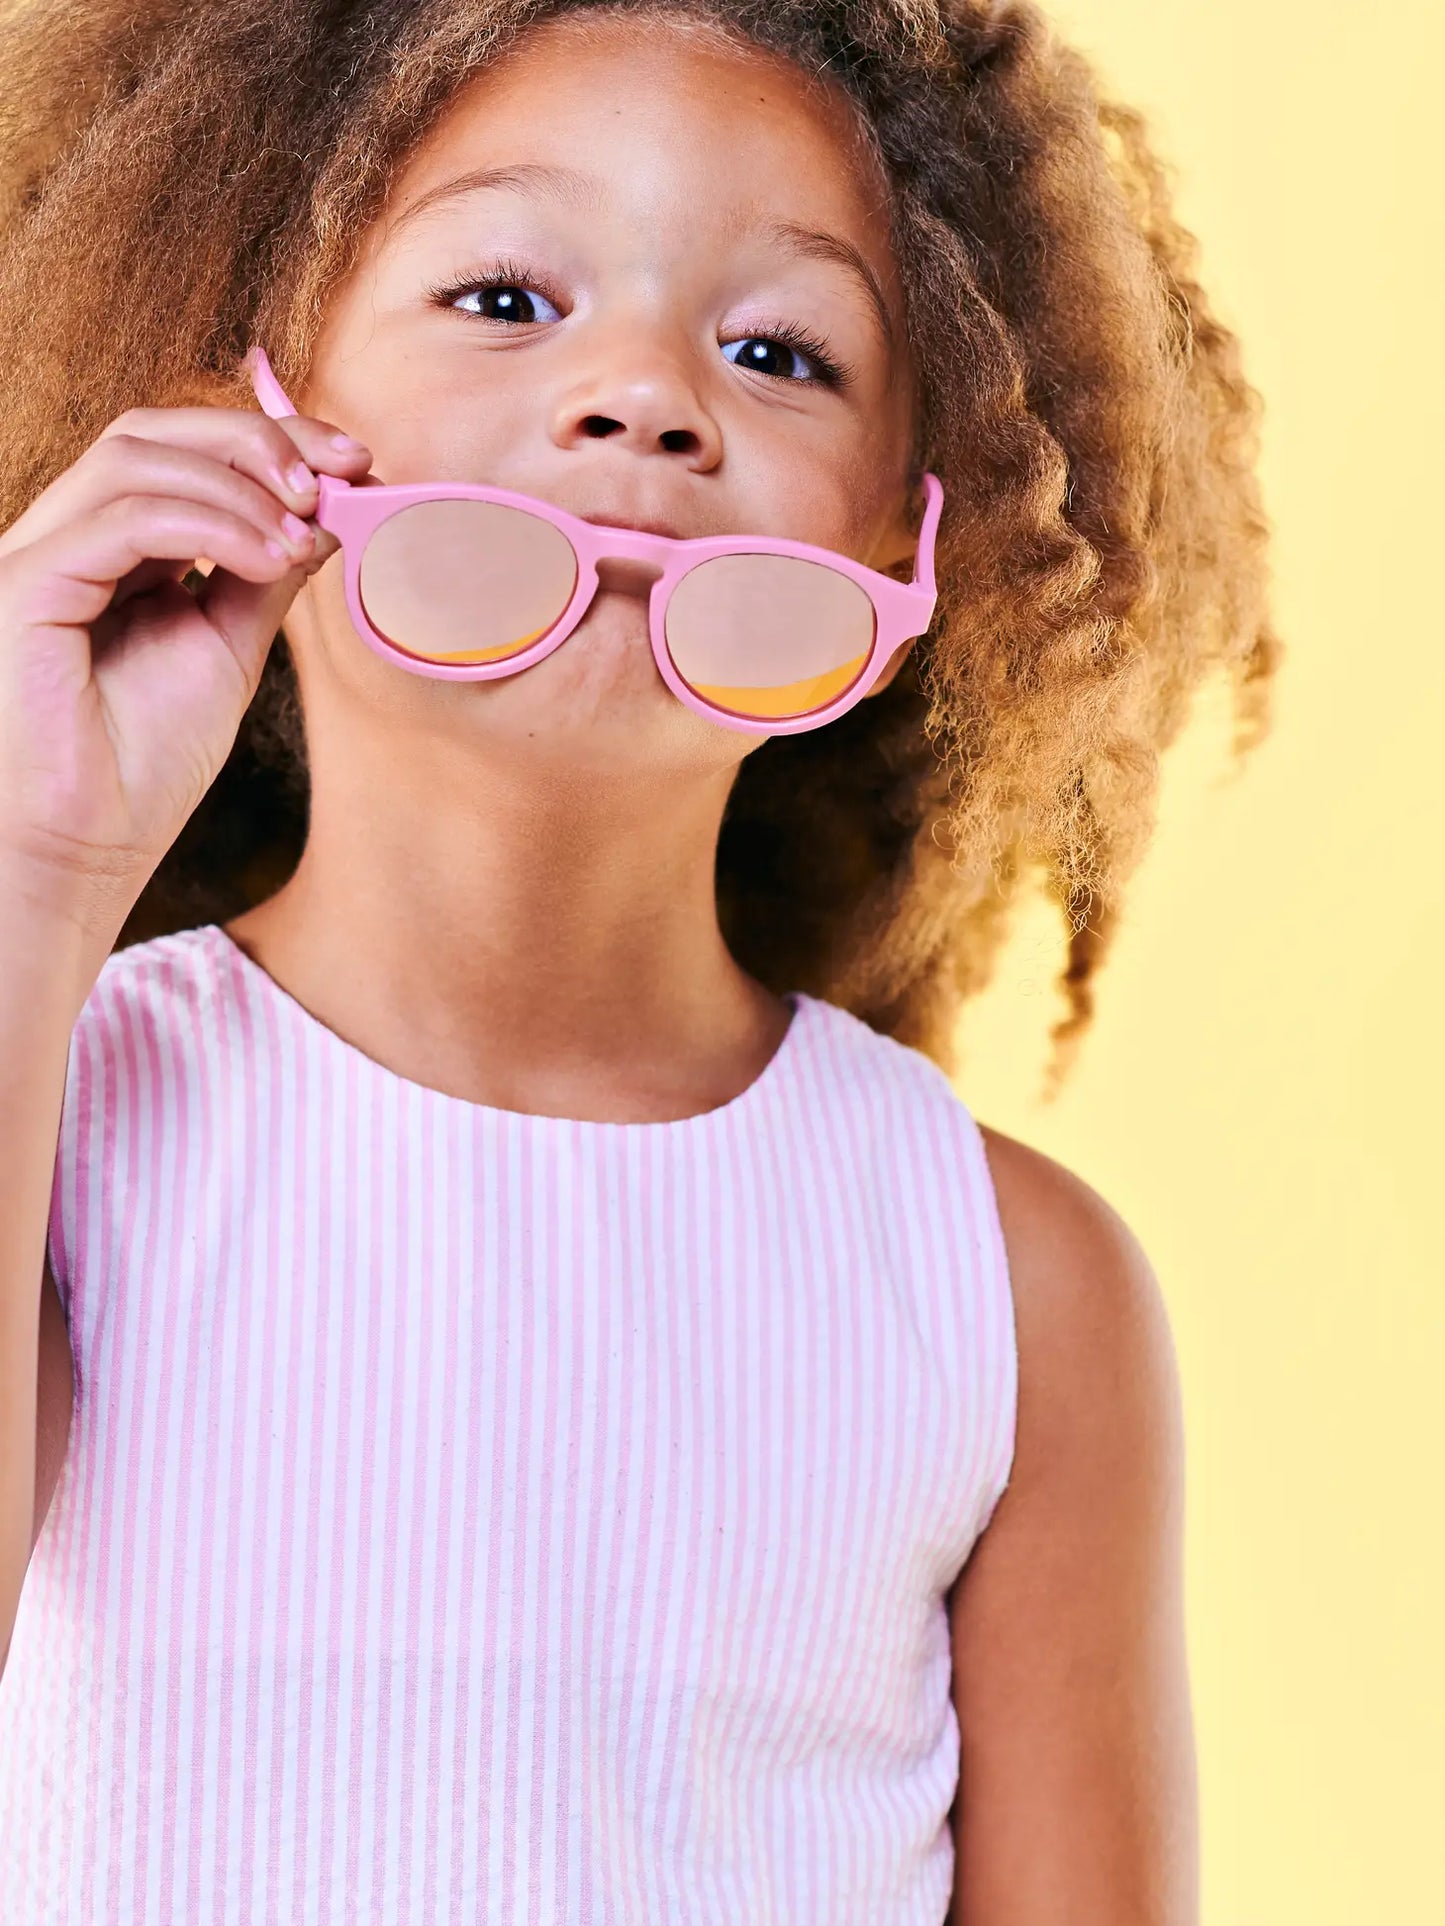 Babiators Polarized Keyhole Sunglasses | Pretty in Pink with Pink Mirrored Lenses